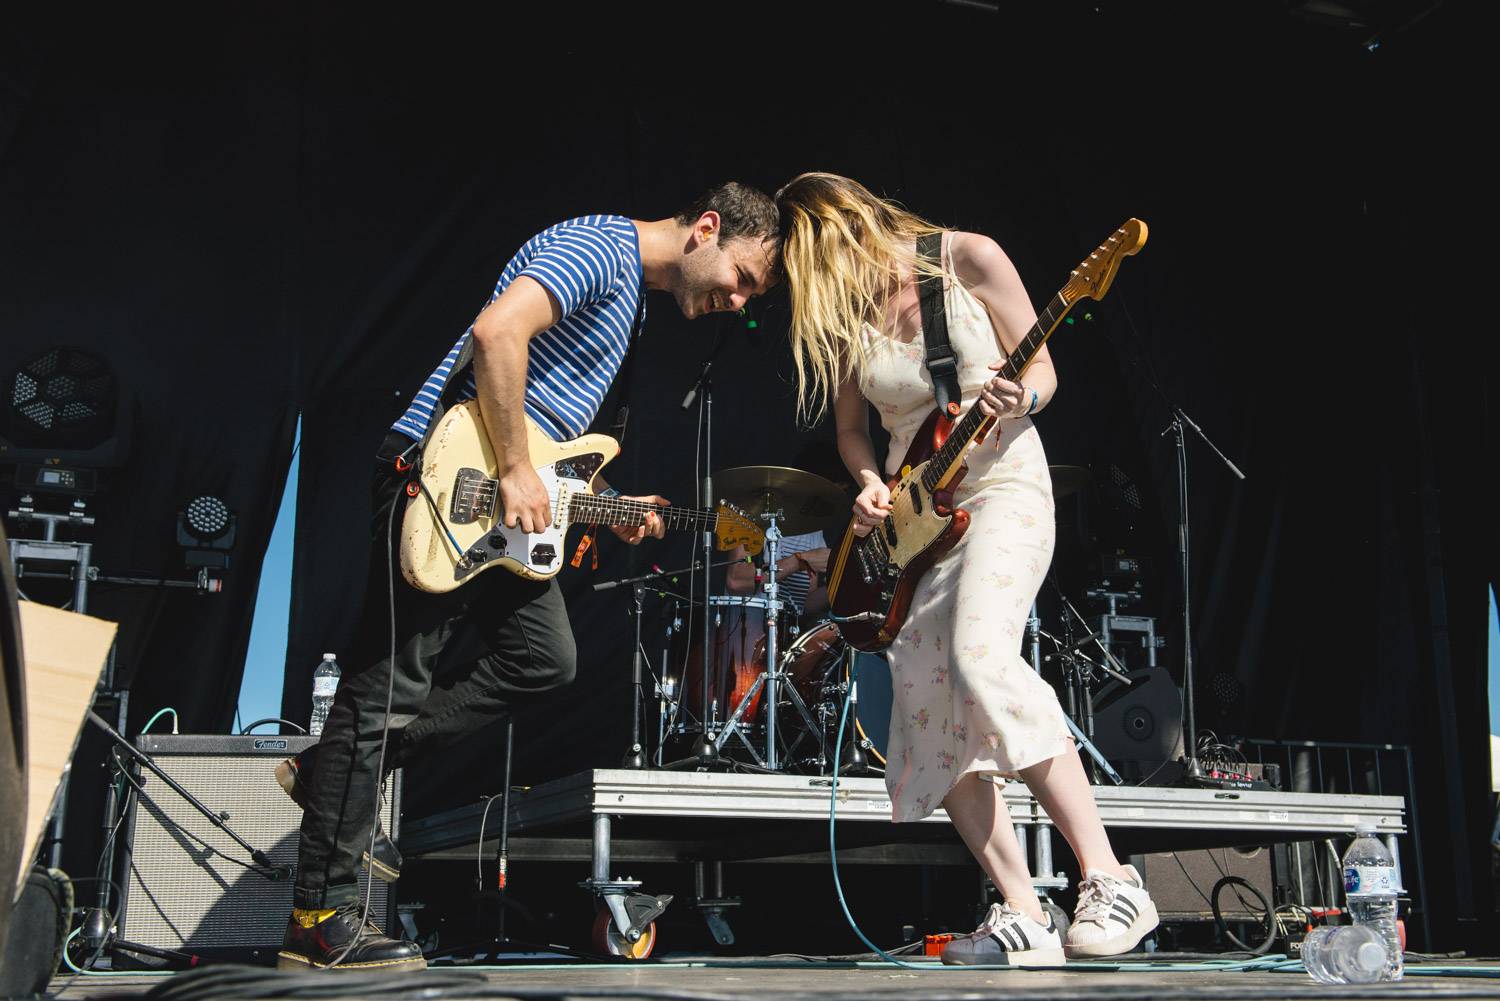 Charly Bliss at the Sasquatch Music Festival 2018 - Day 3, Gorge WA, May 27 2018. Pavel Boiko photo.